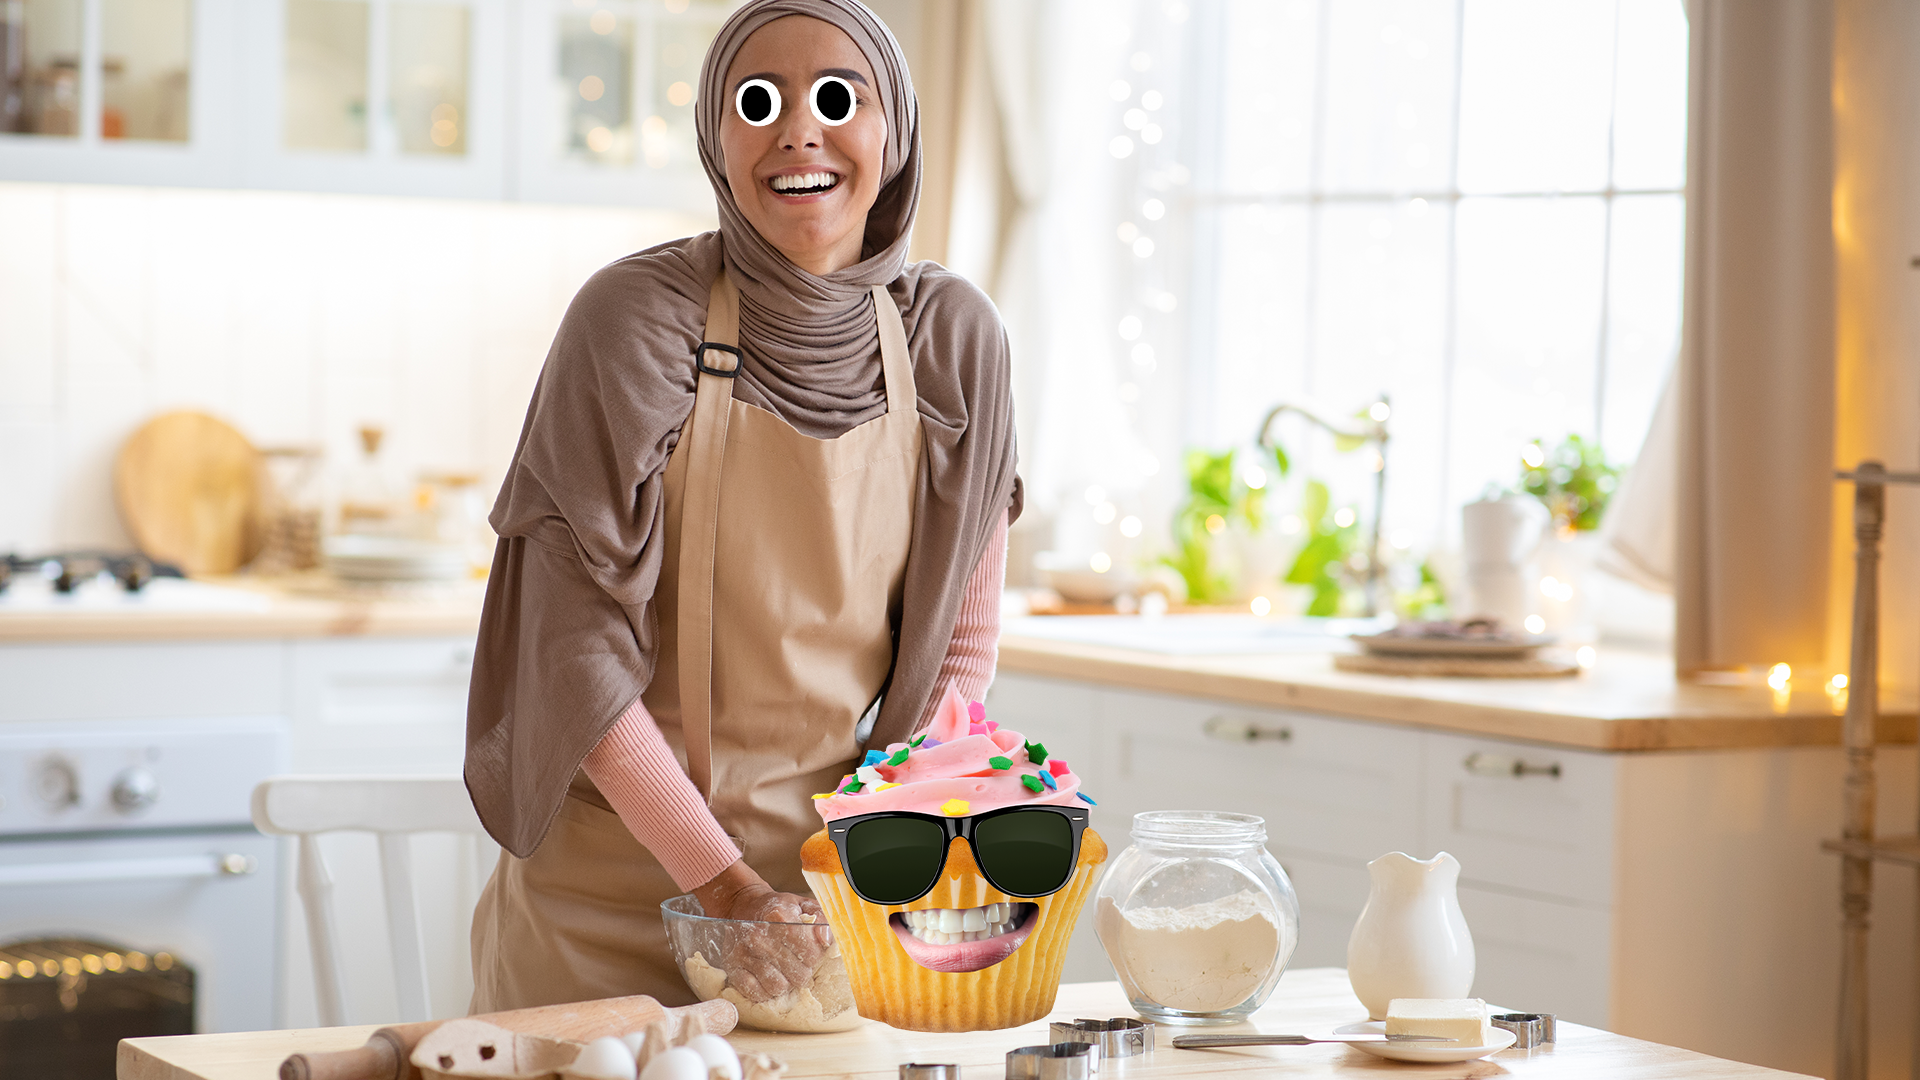 Woman baking in kitchen with derpy cupcake